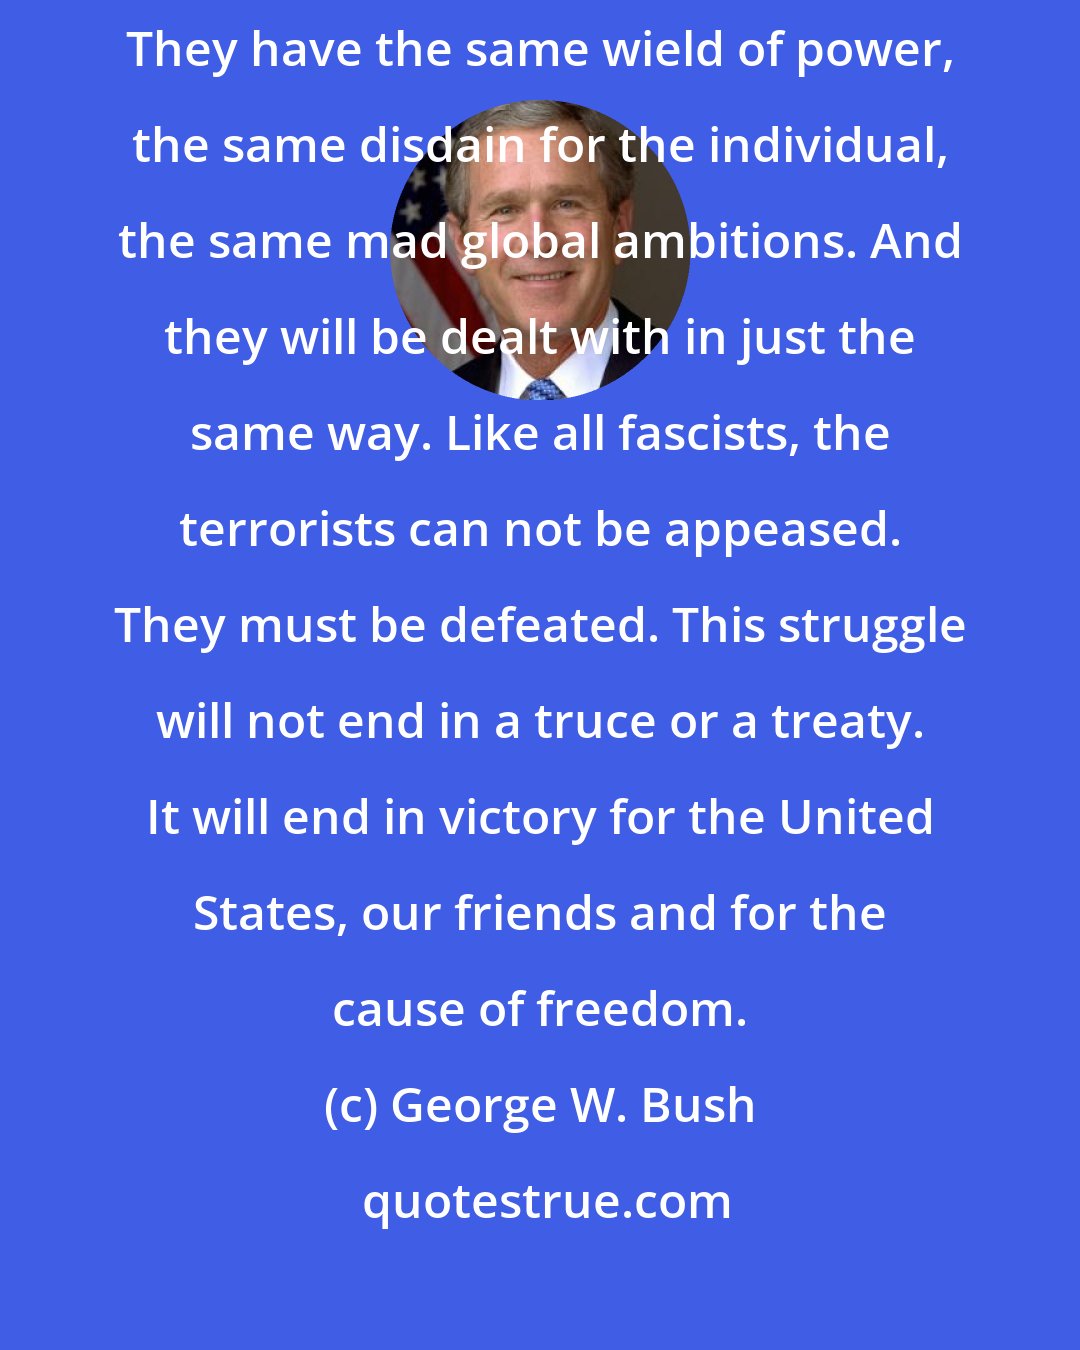 George W. Bush: We've seen their kind before. The terrorists are the heirs to fascism. They have the same wield of power, the same disdain for the individual, the same mad global ambitions. And they will be dealt with in just the same way. Like all fascists, the terrorists can not be appeased. They must be defeated. This struggle will not end in a truce or a treaty. It will end in victory for the United States, our friends and for the cause of freedom.